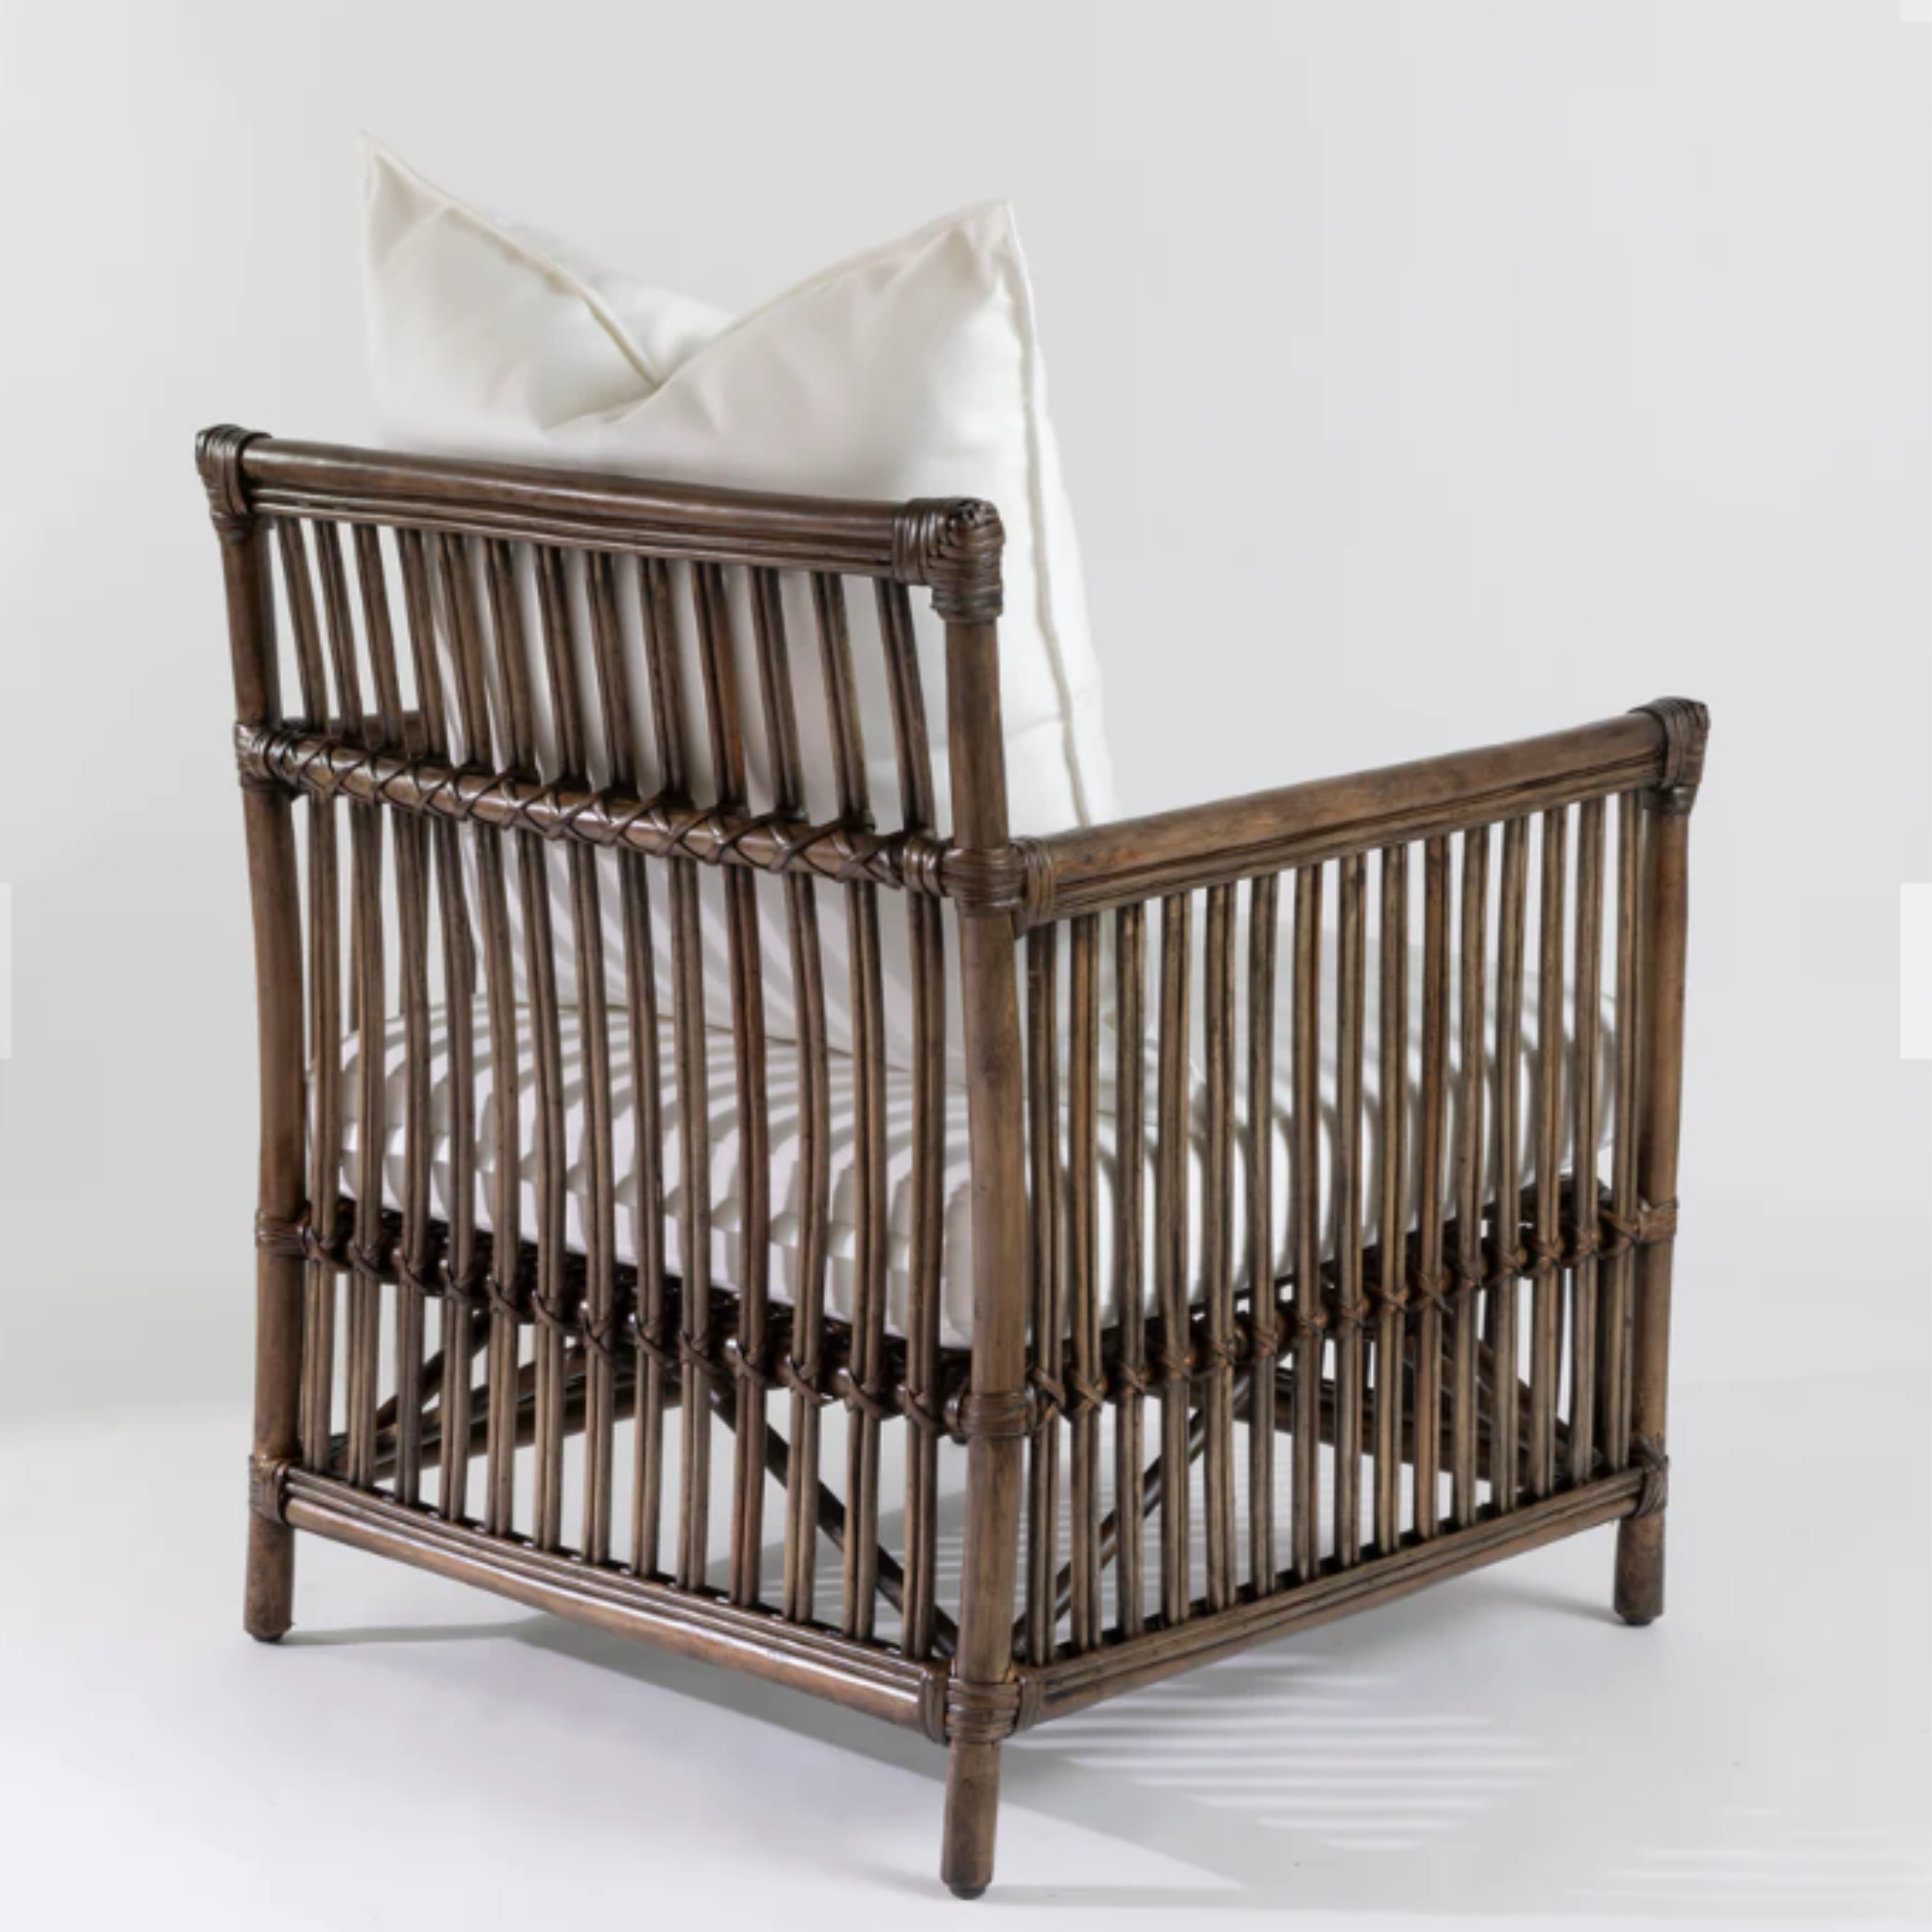 BERMUDA ARMCHAIR IN WALNUT RATTAN WITH NATURAL CANVAS SQUABS